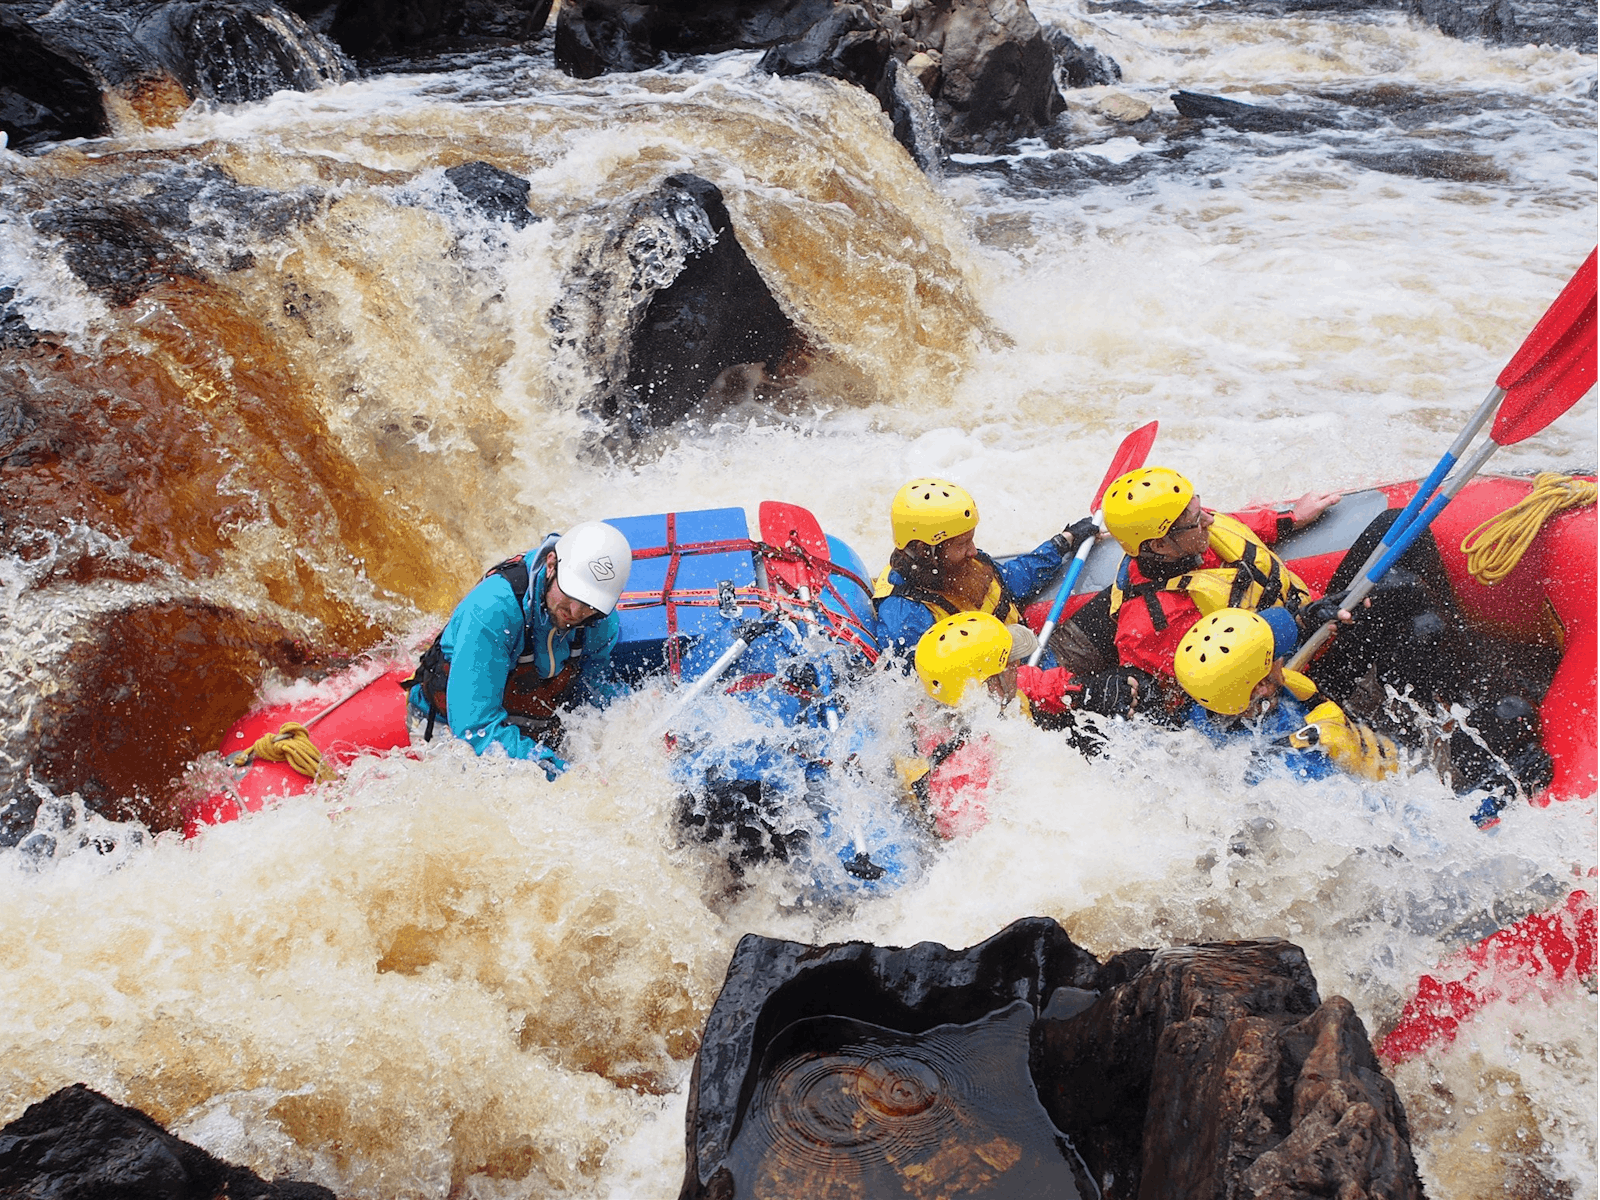 Elias and his crew are getting submerged on the Trojan rapid.